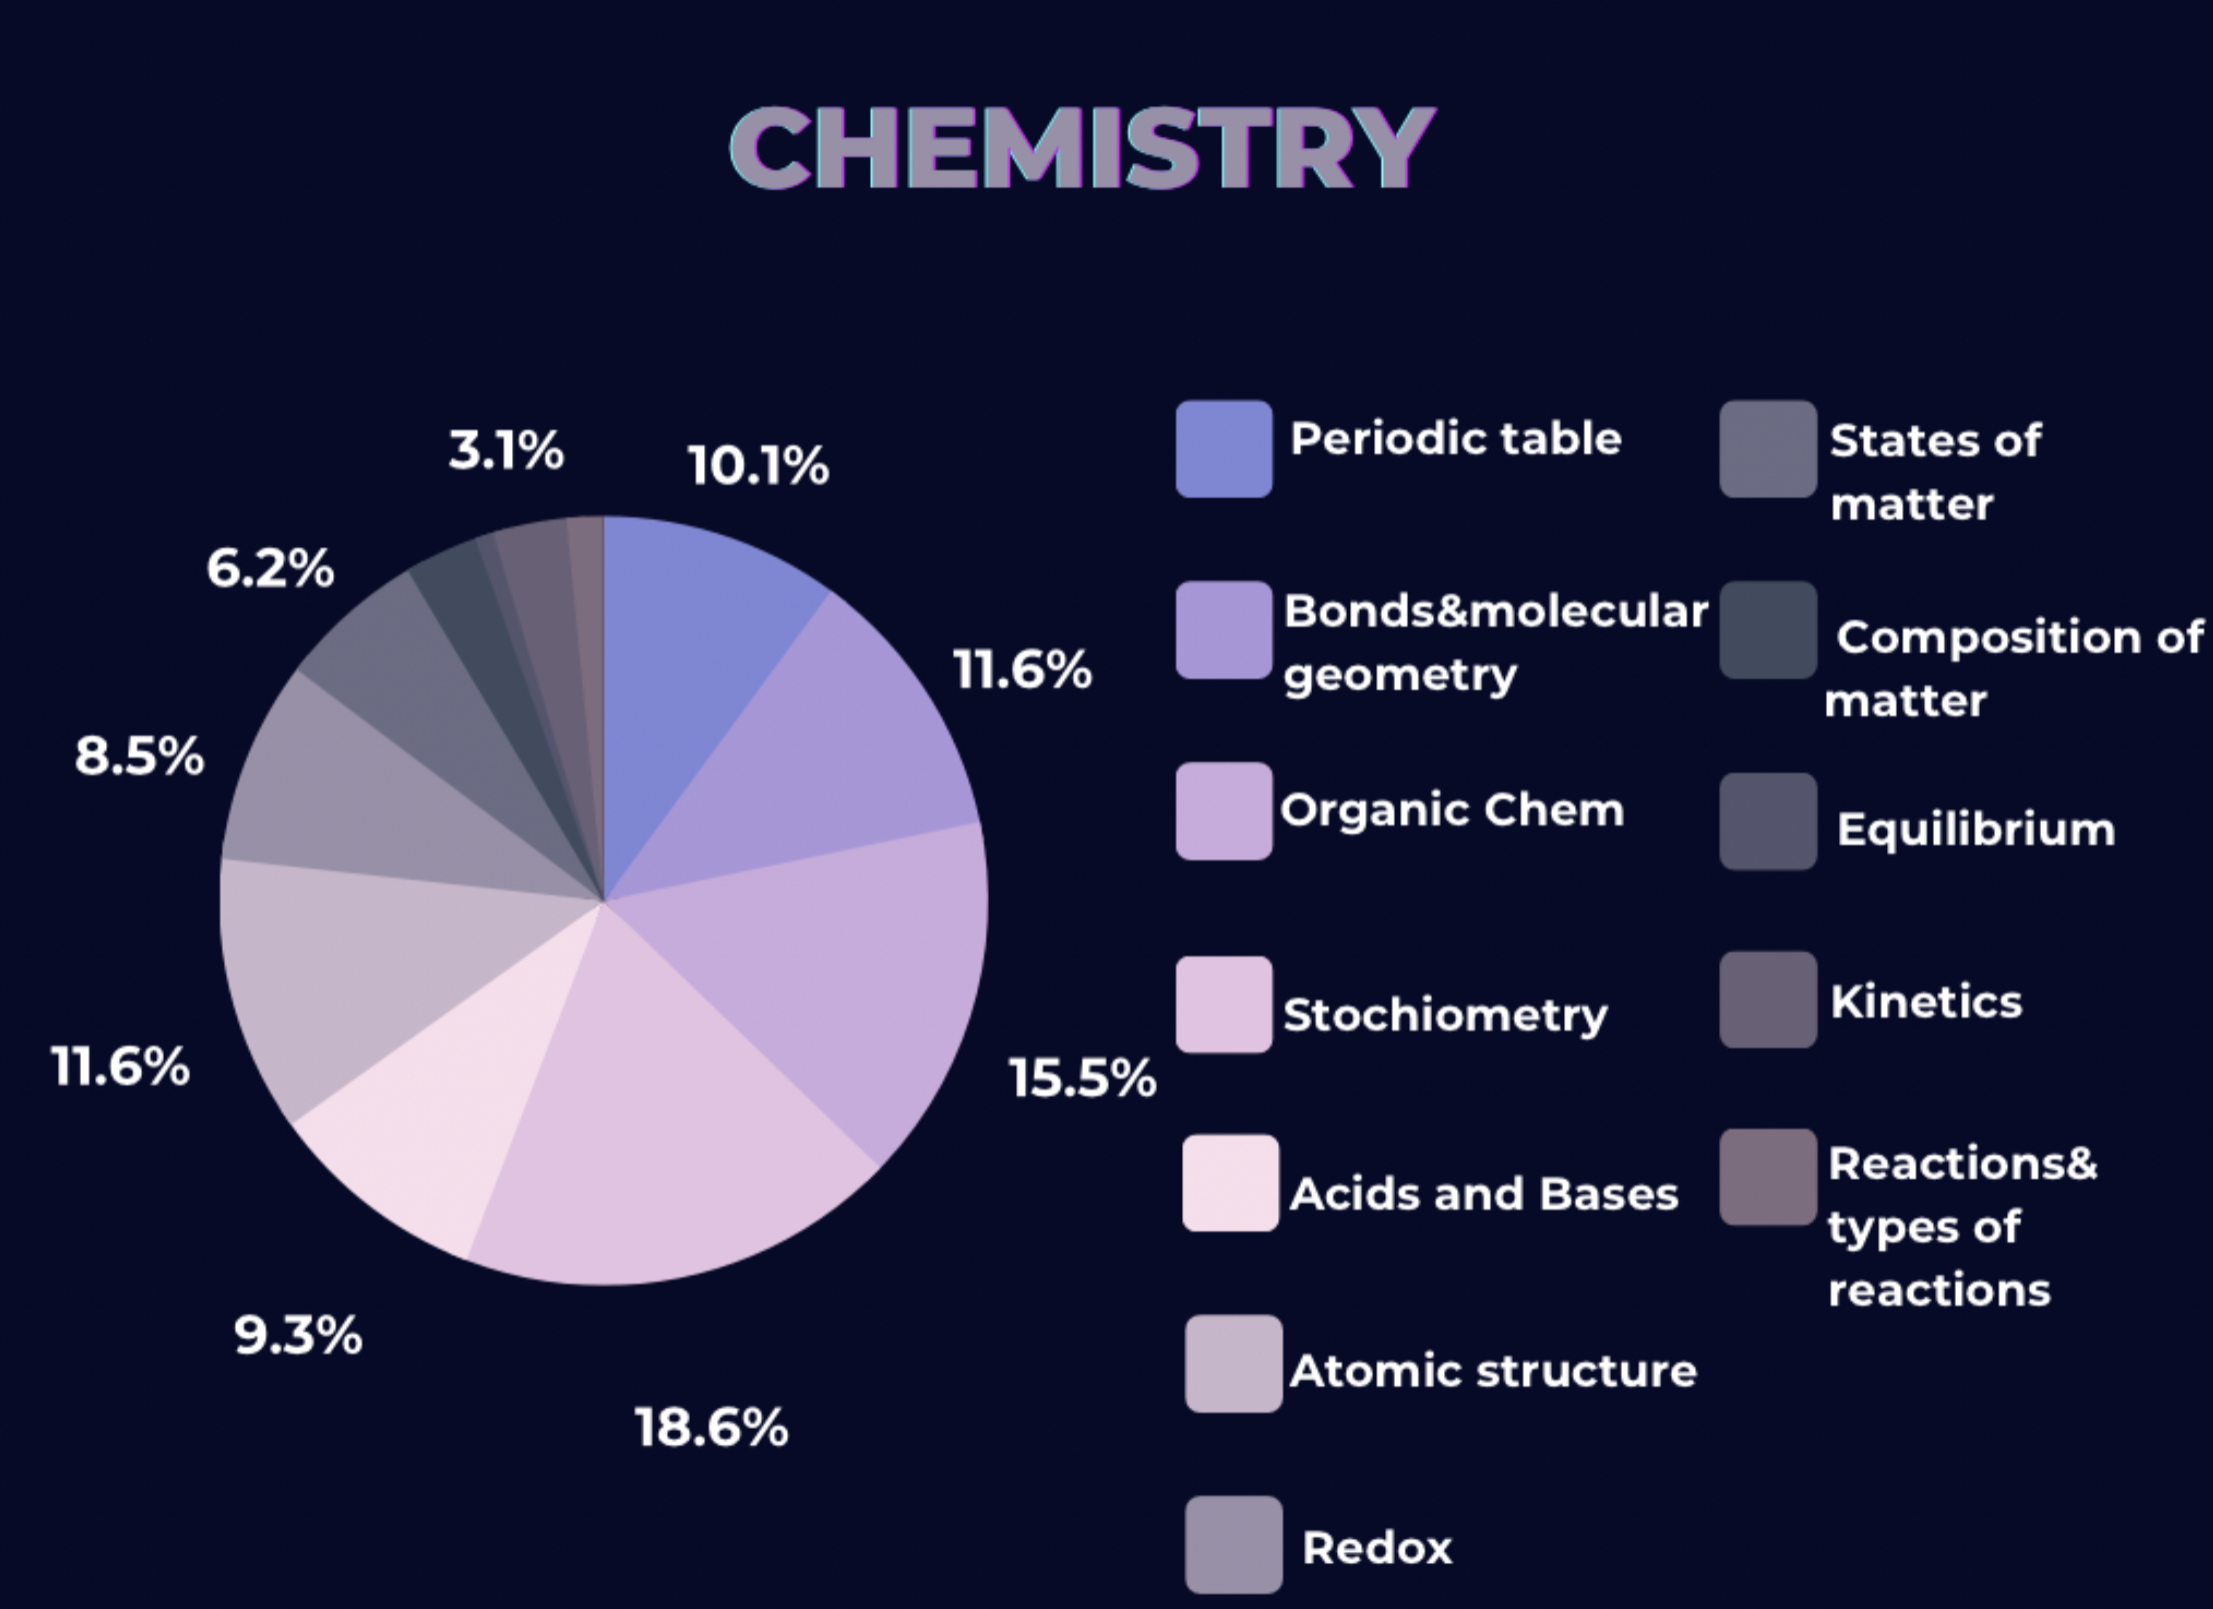 IMAT Chemistry section breakdown by topics 2011 to 2022